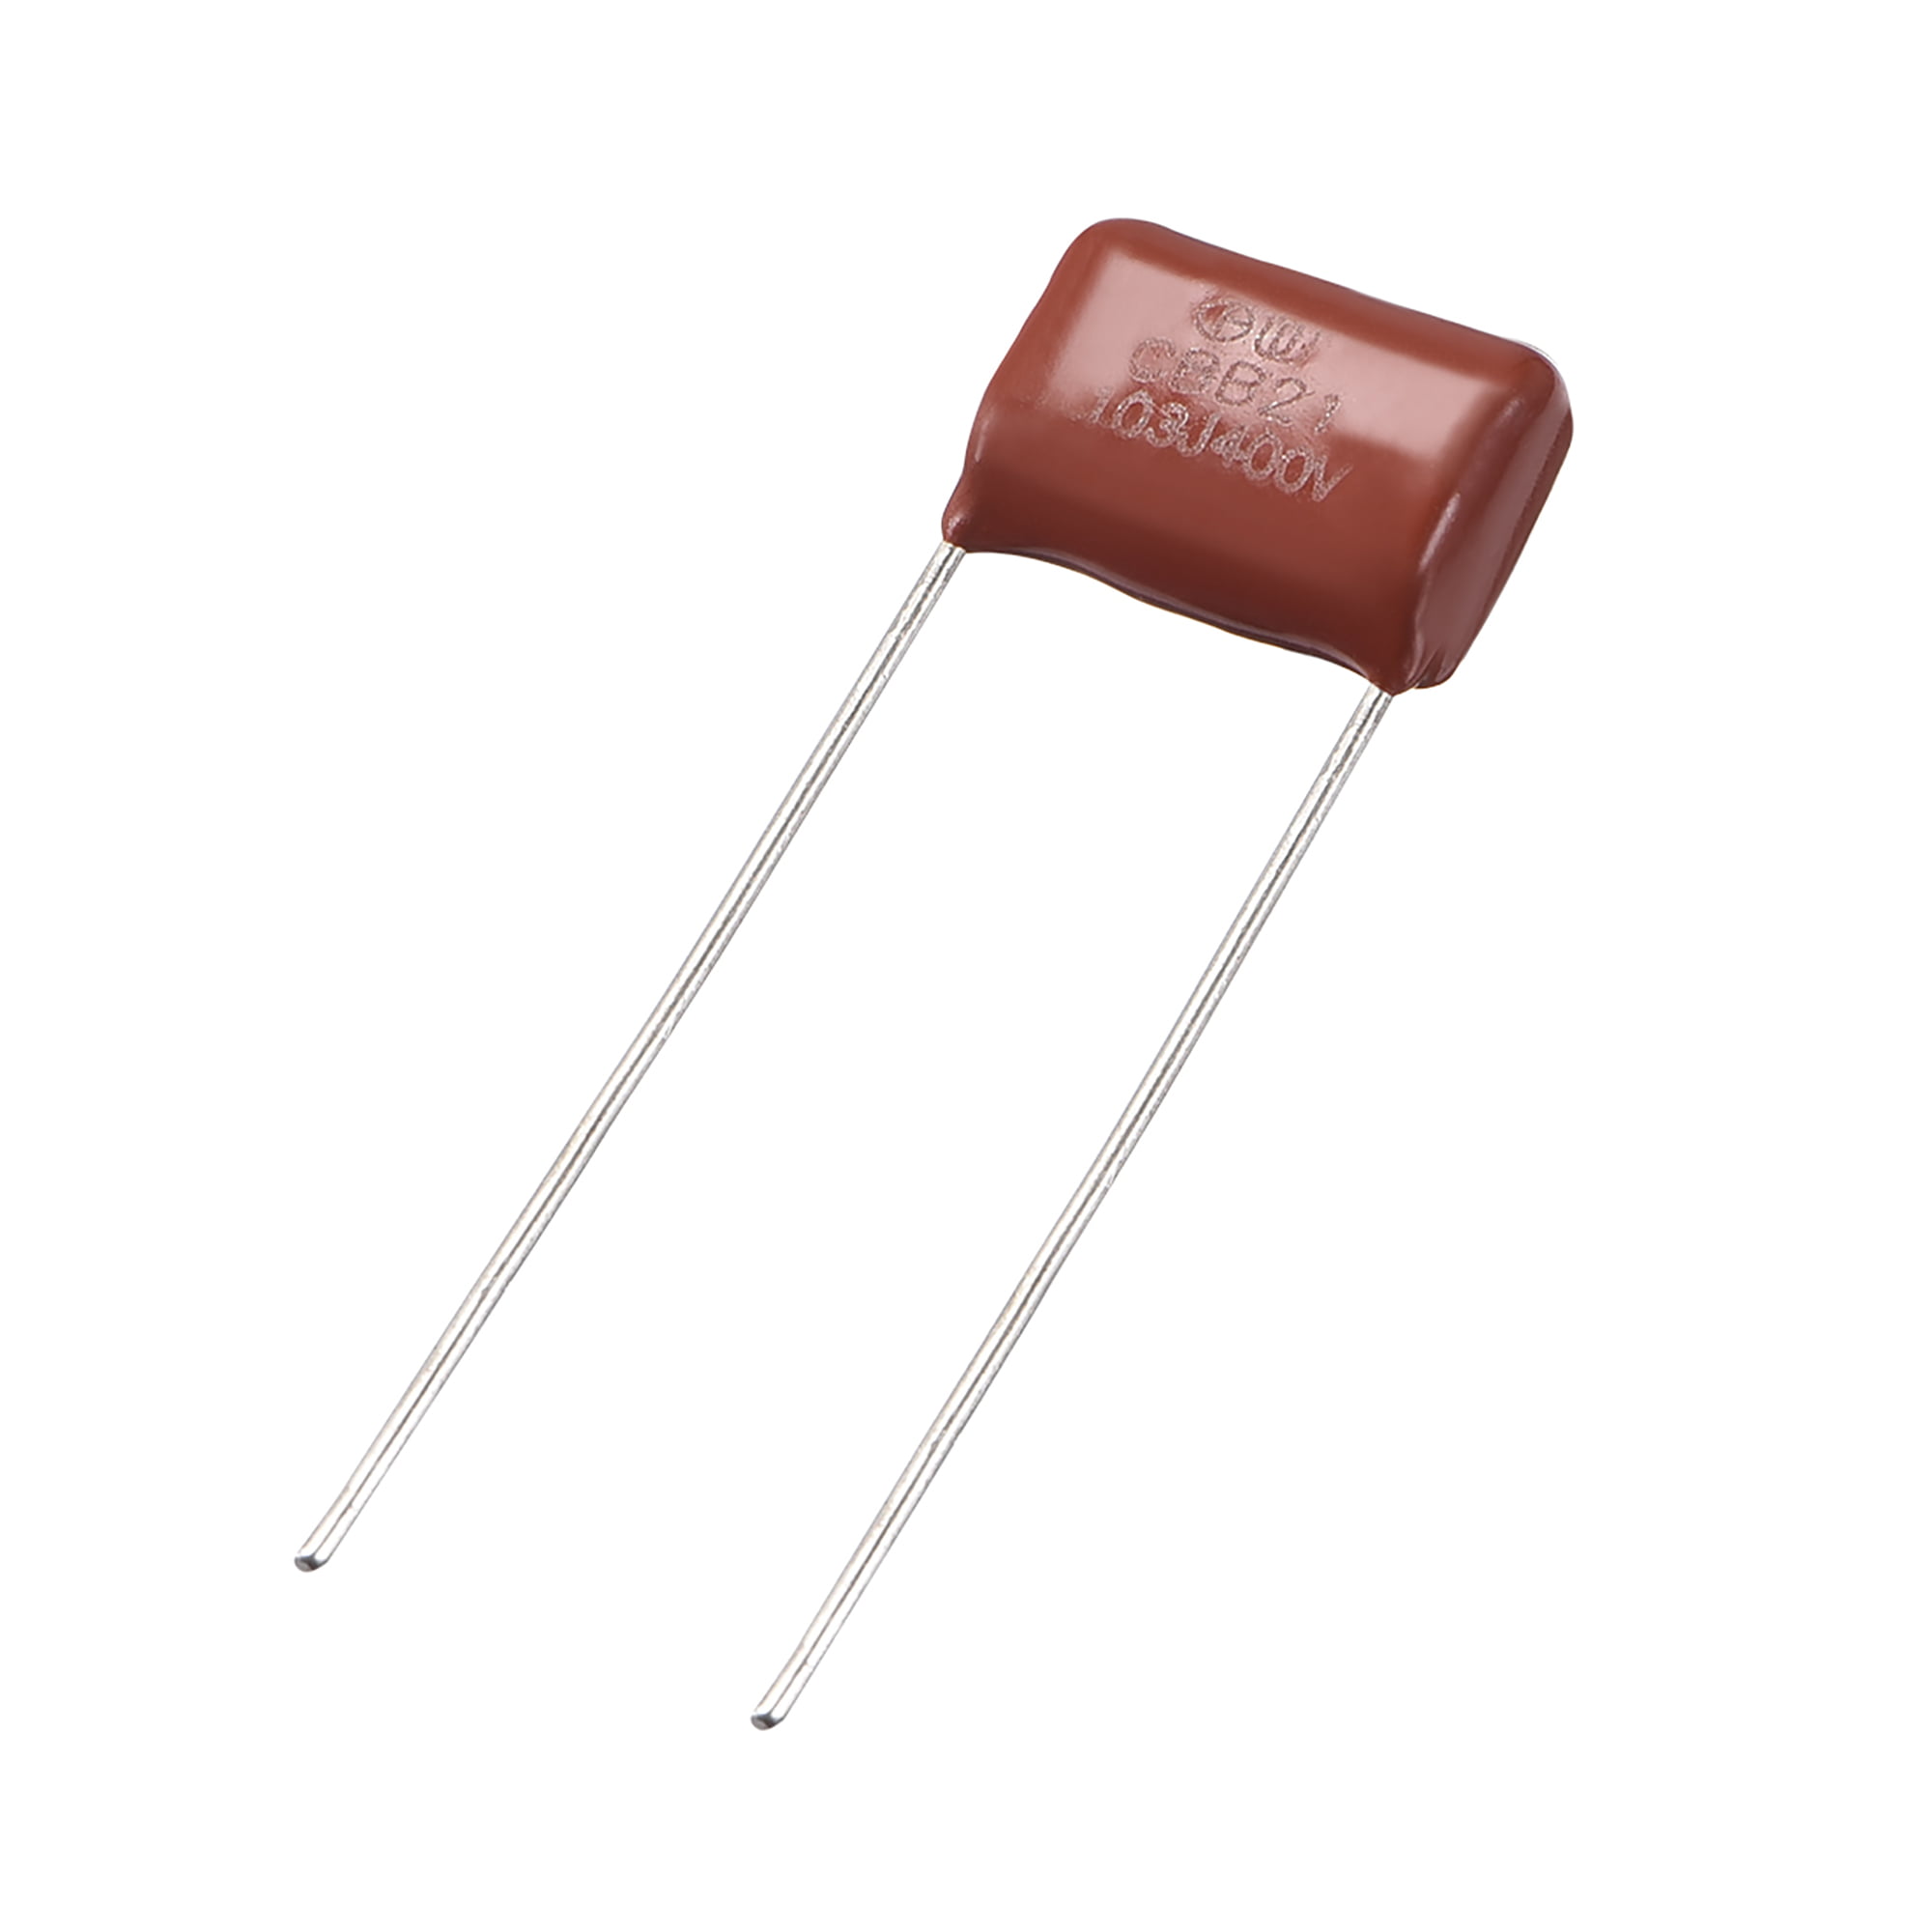 uxcell CBB21 Metallized Polypropylene Film Capacitors 400V 0.22uF for Electric Circuits Energy Saving Lamps Pack of 10